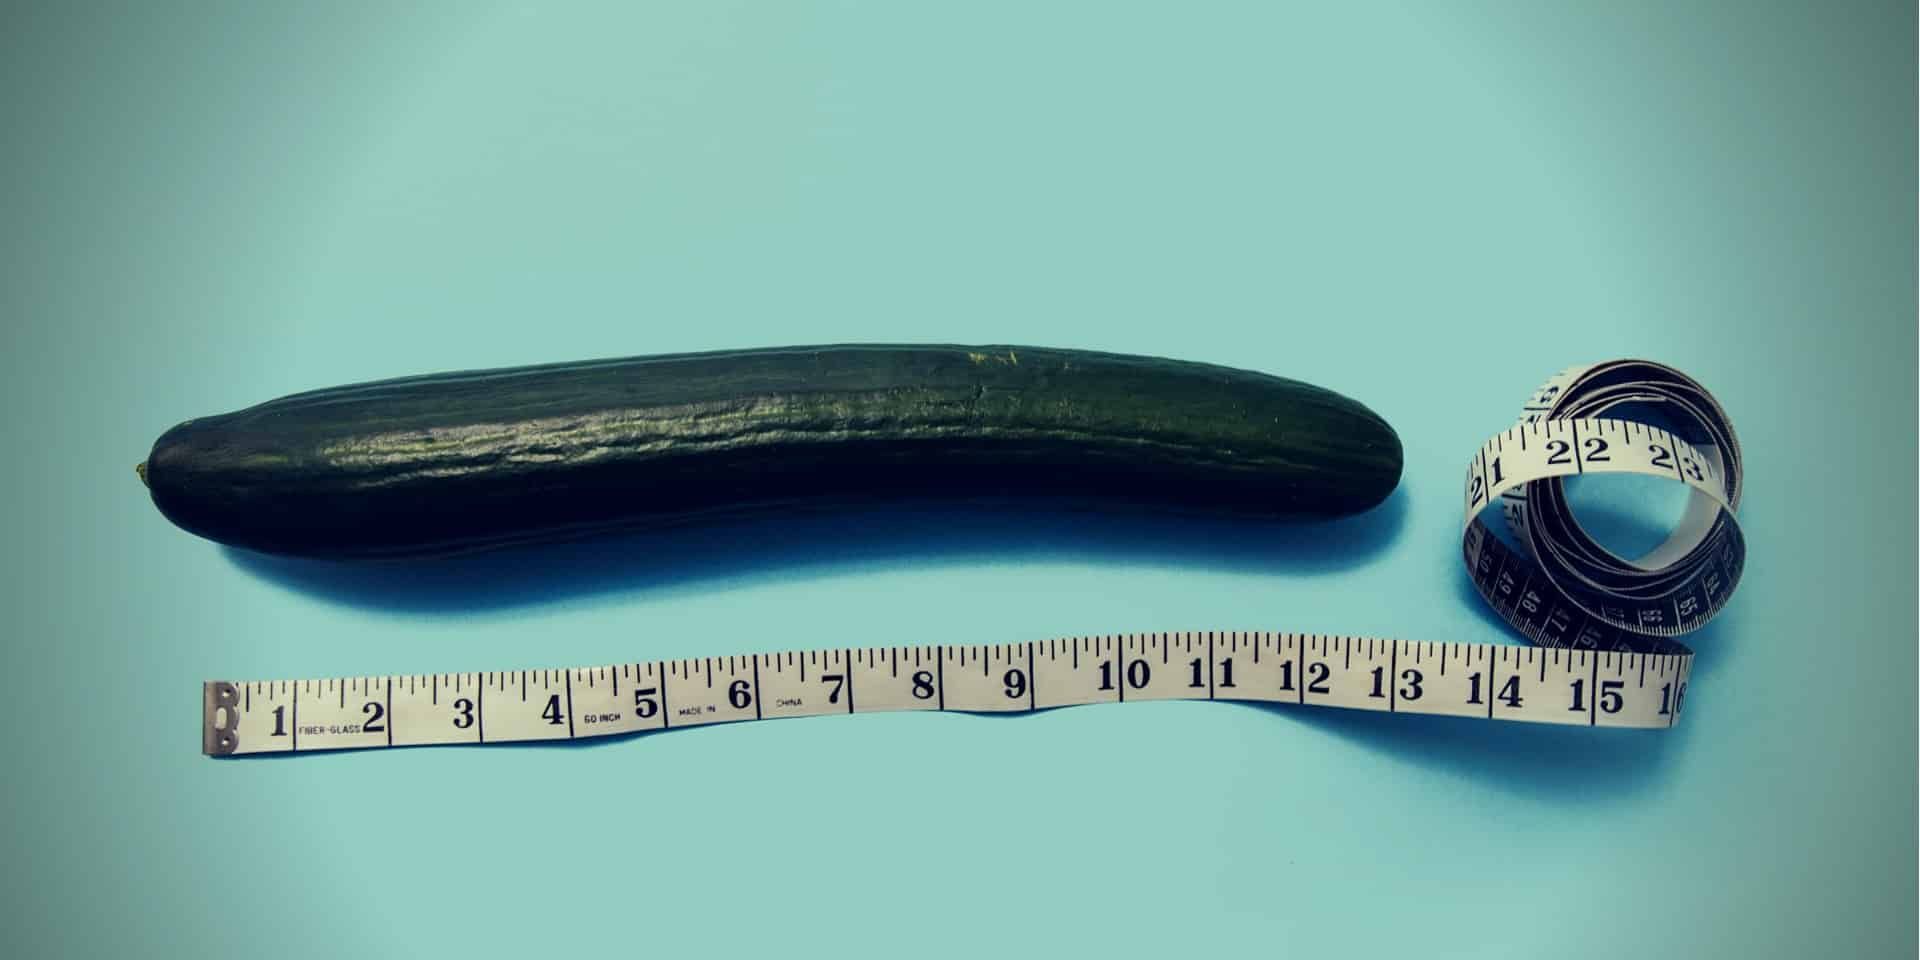 Male Enhancement cucumber with a tape measure